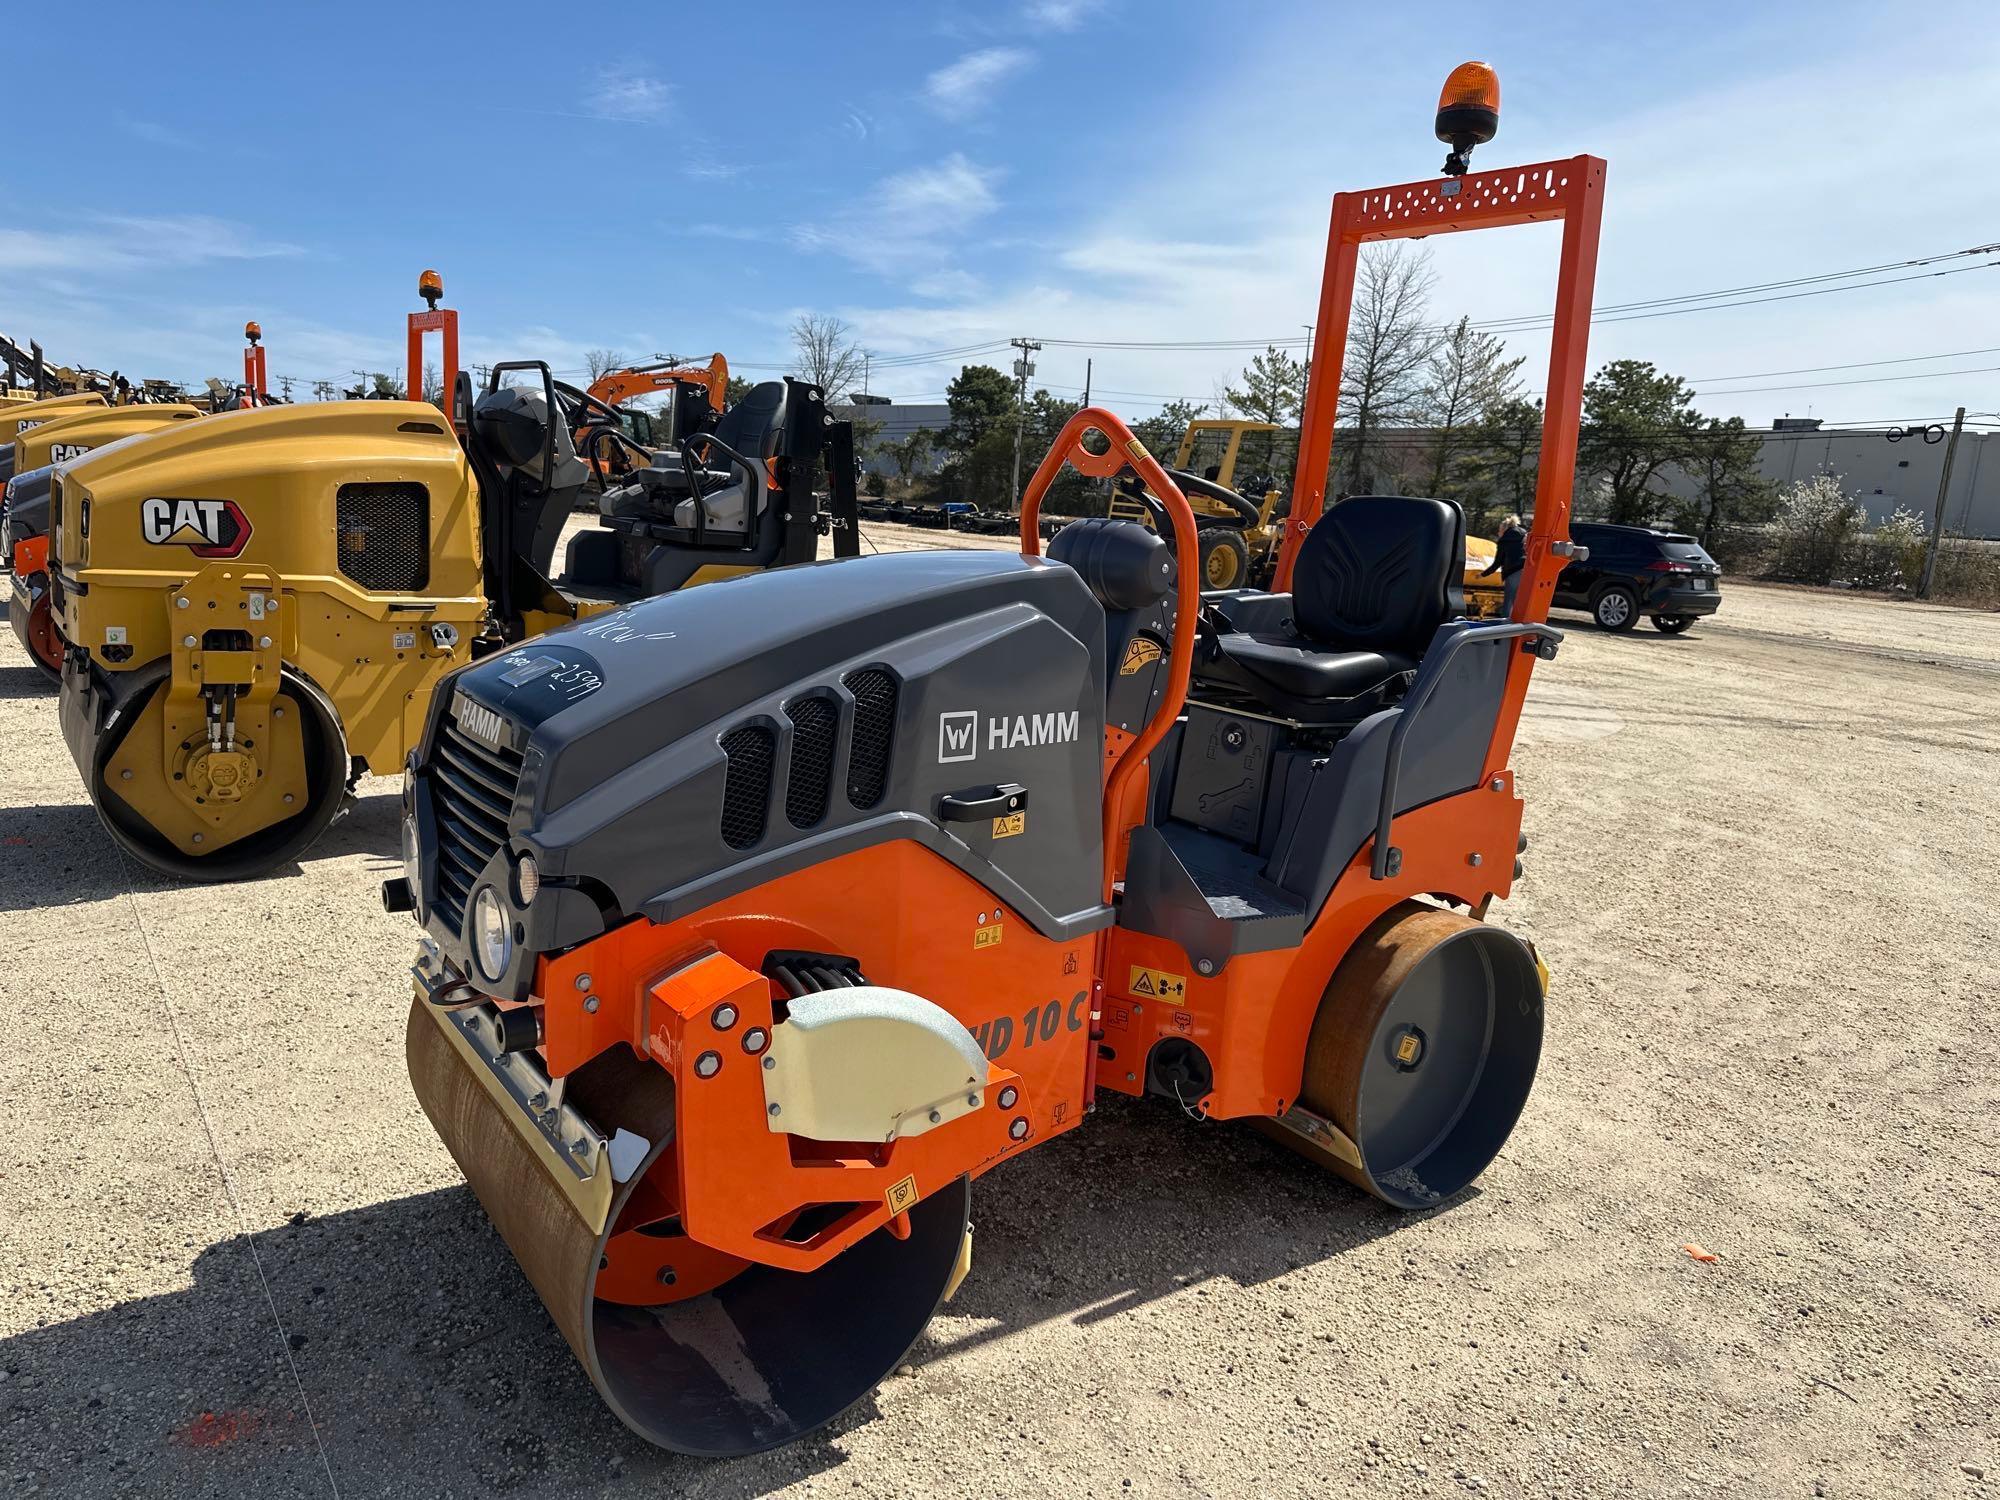 NEW UNUSED HAMM HD10CVV ASPHALT ROLLER SN:02470 powered by diesel engine, equipped with OROPS, 36in.